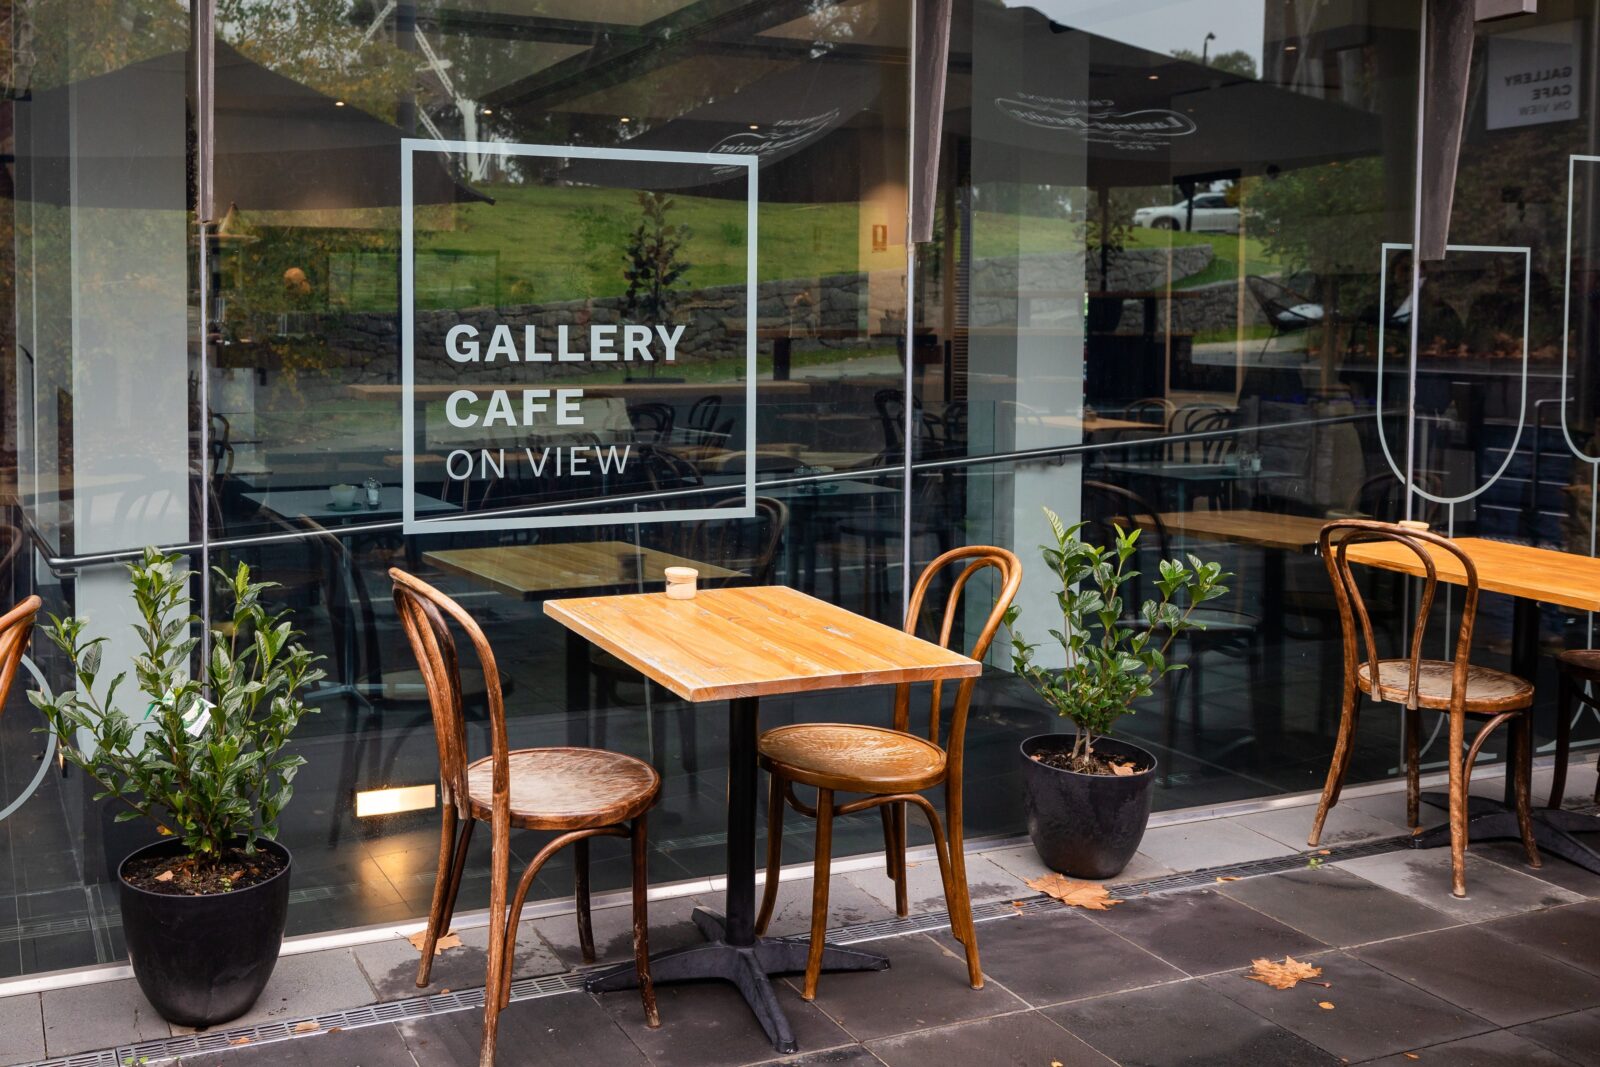 Outdoor seating in front of window that says Gallery Cafe on View